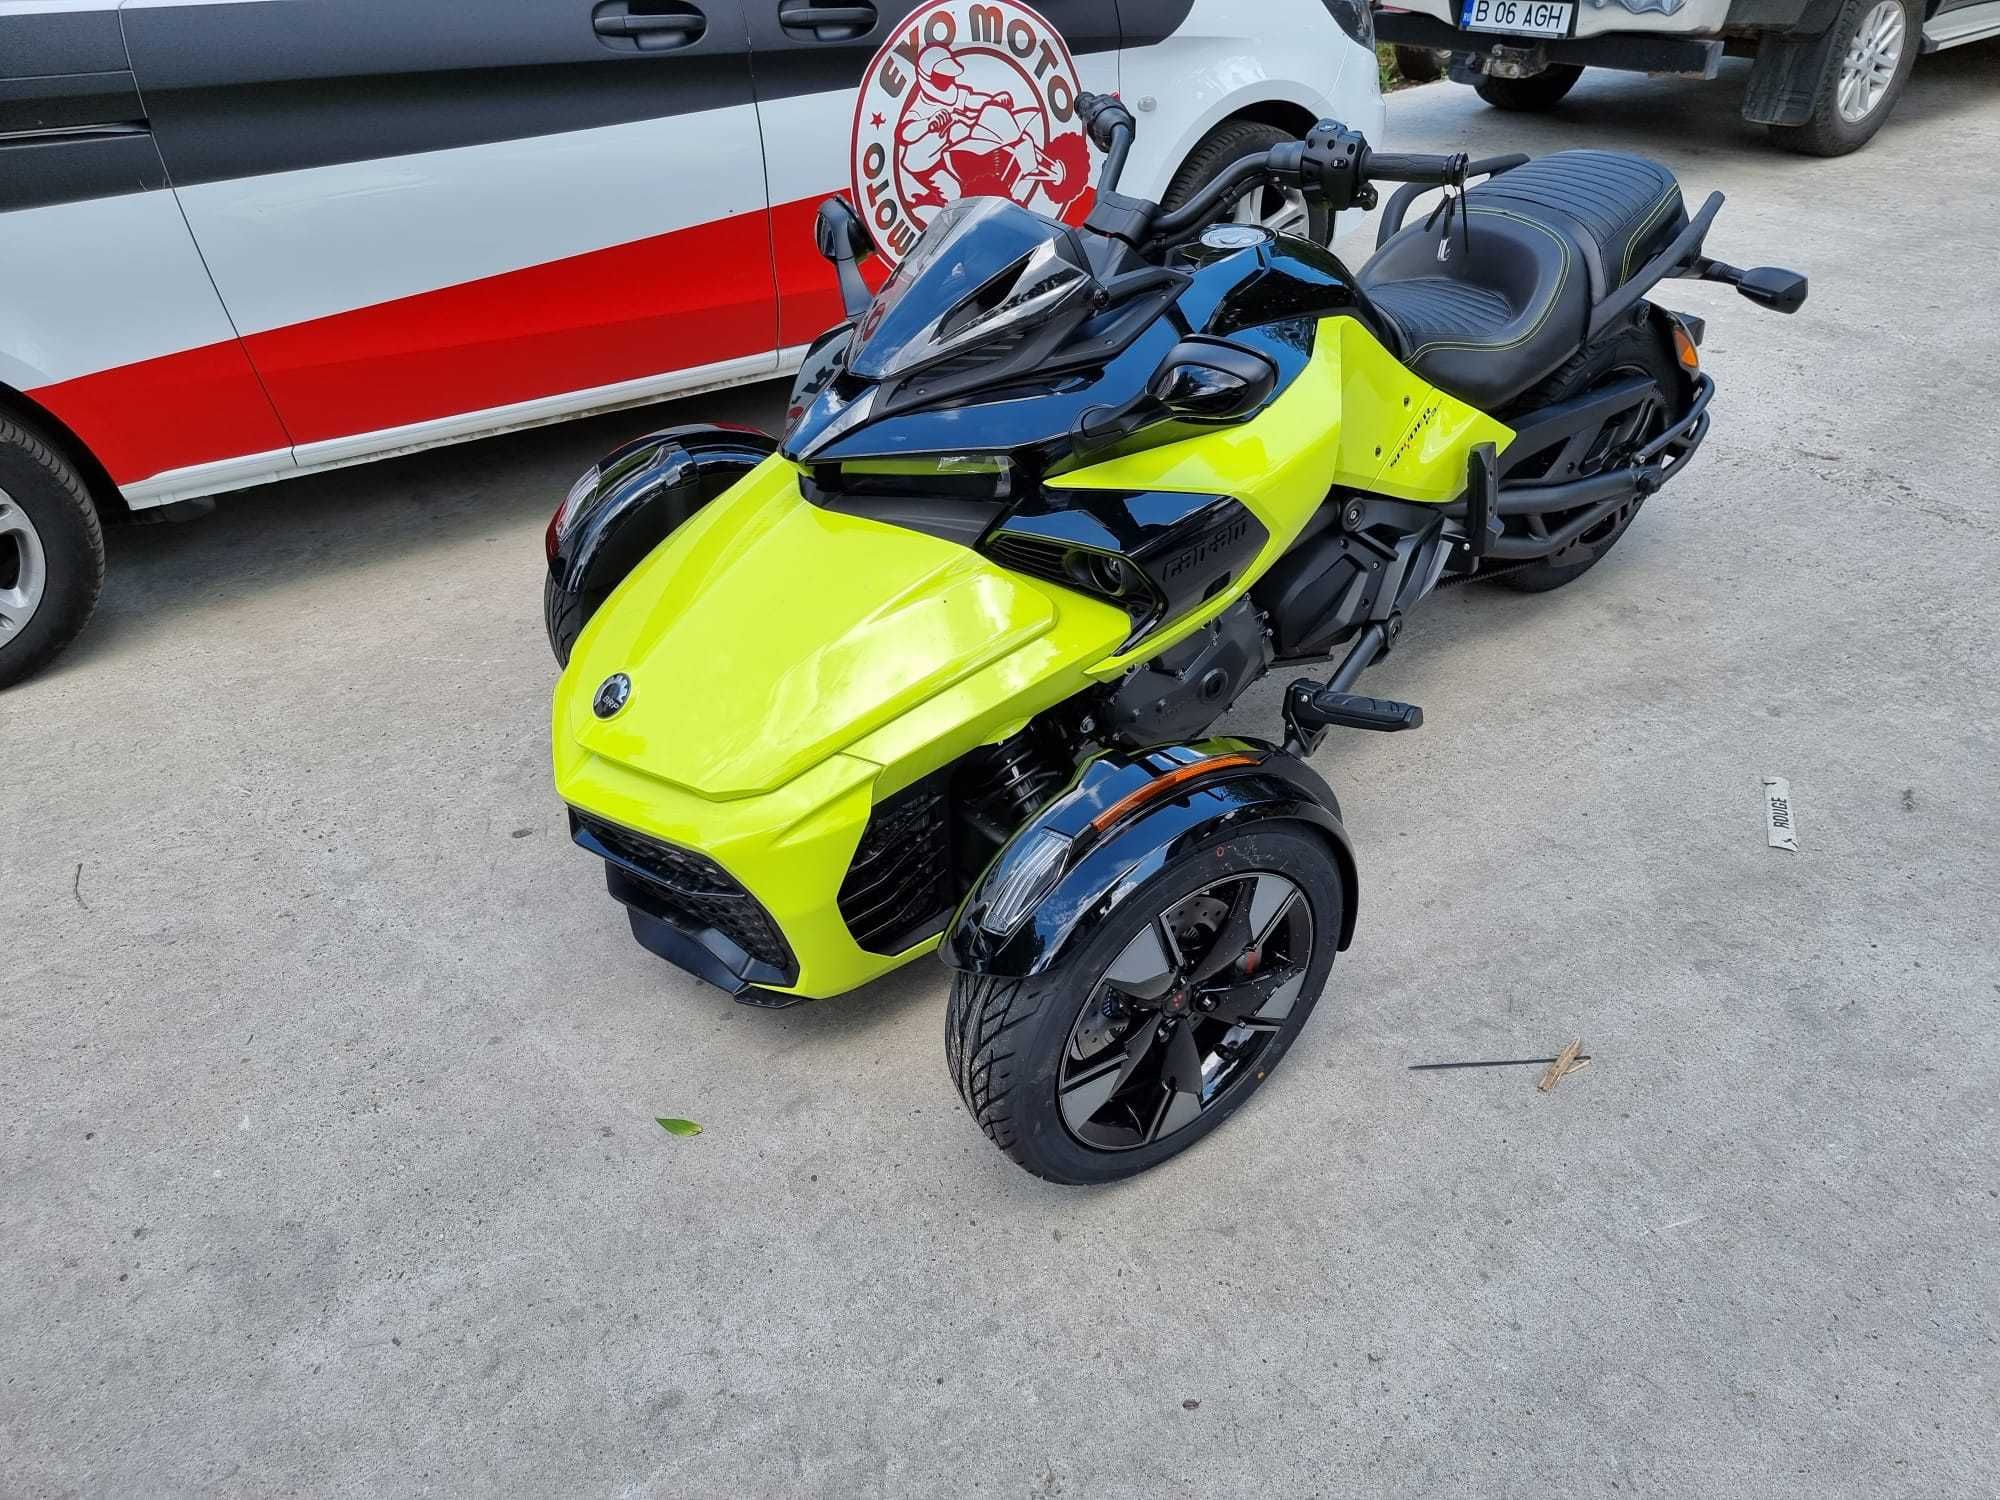 Promotie Can-Am Spyder F3-S Special Series Manta Green 2023